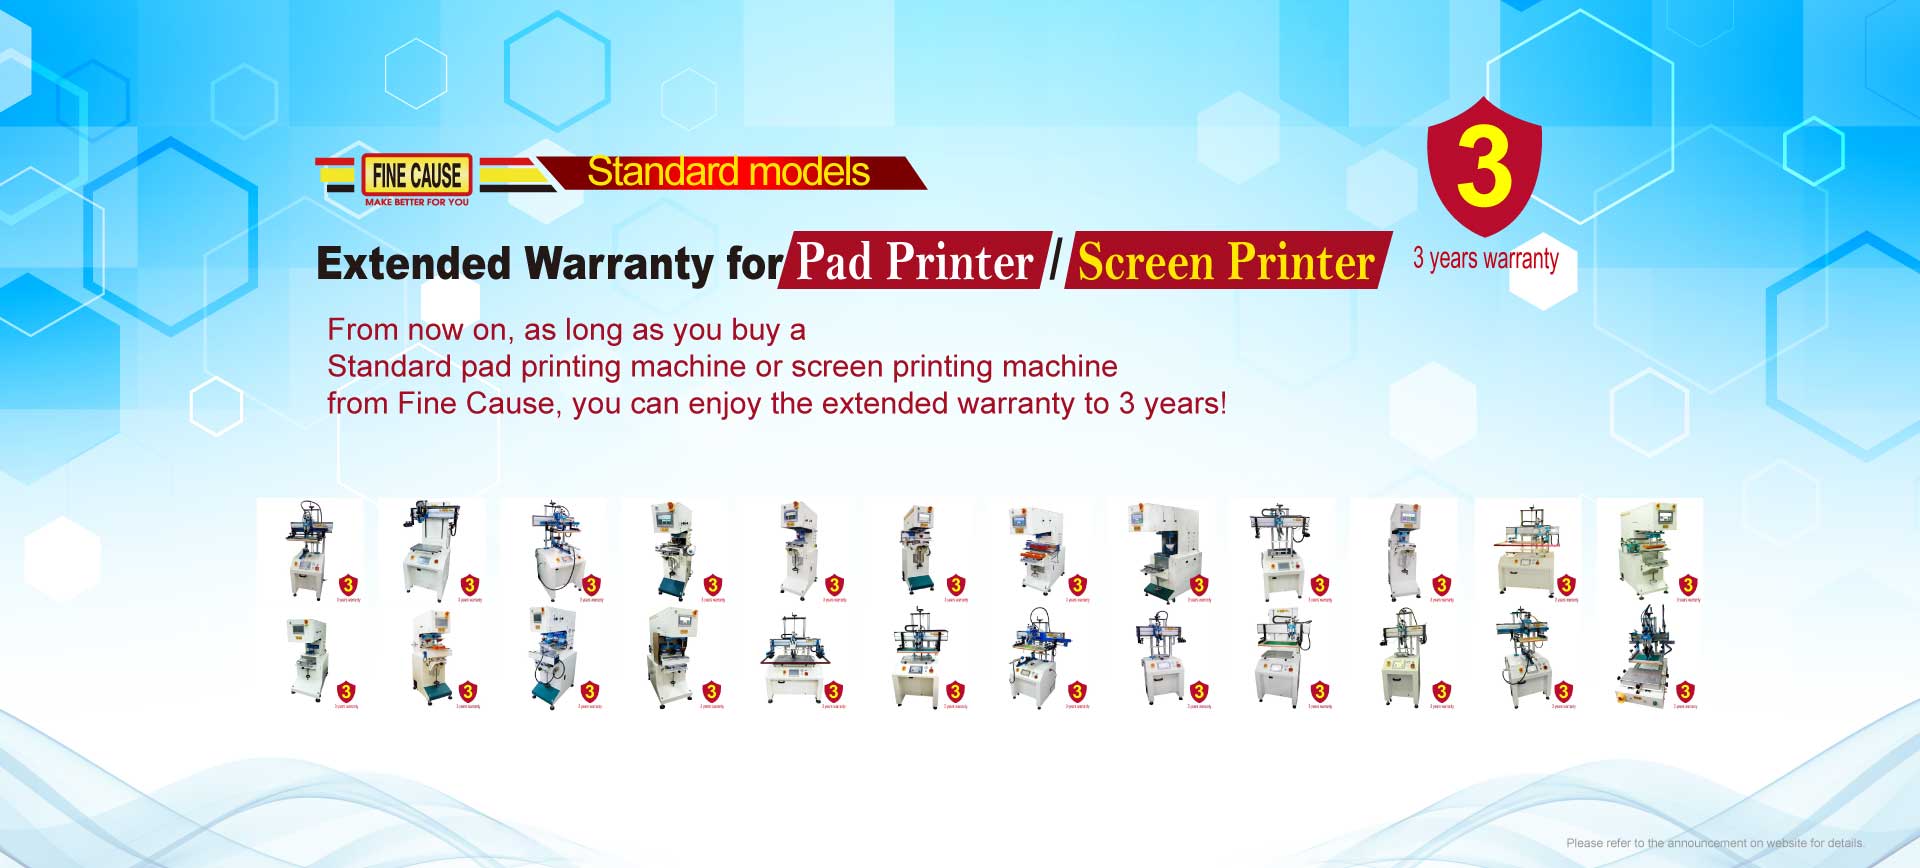 Extended Warranty to 2 Years for Pad Printer / Screen Printer